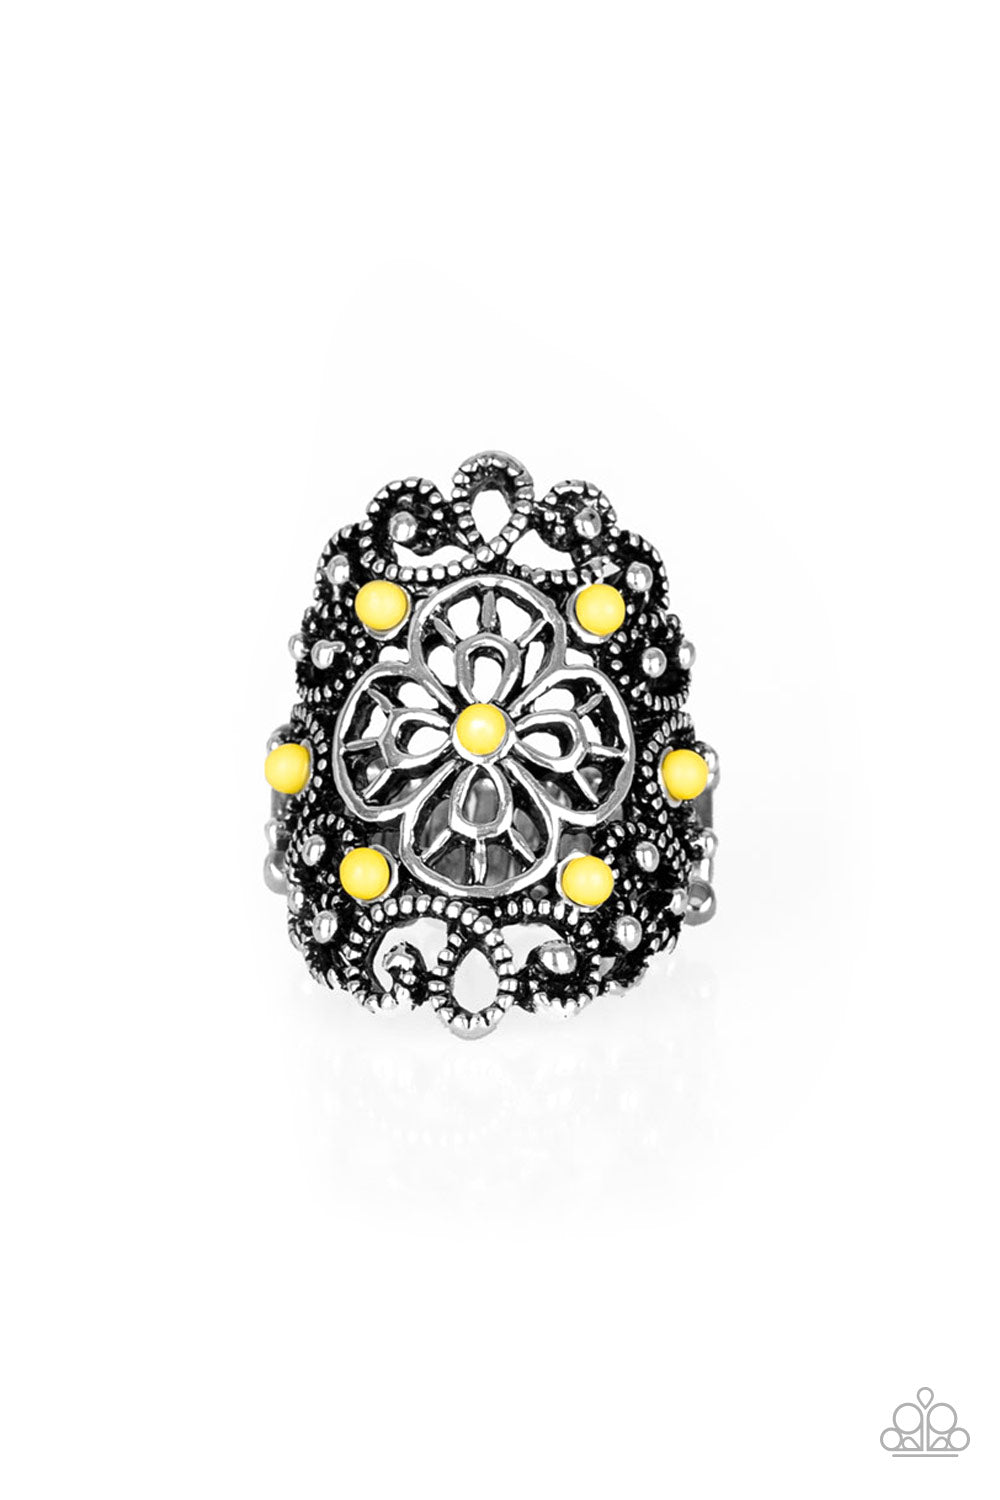 Floral Fancies - Yellow and Silver Floral Ring - Paparazzi Accessories - Dainty yellow beads are sprinkled across a shimmery frame swirling with silver filigree, creating a whimsical floral frame atop the finger. Features a stretchy band for a flexible fit. Sold as one individual ring.